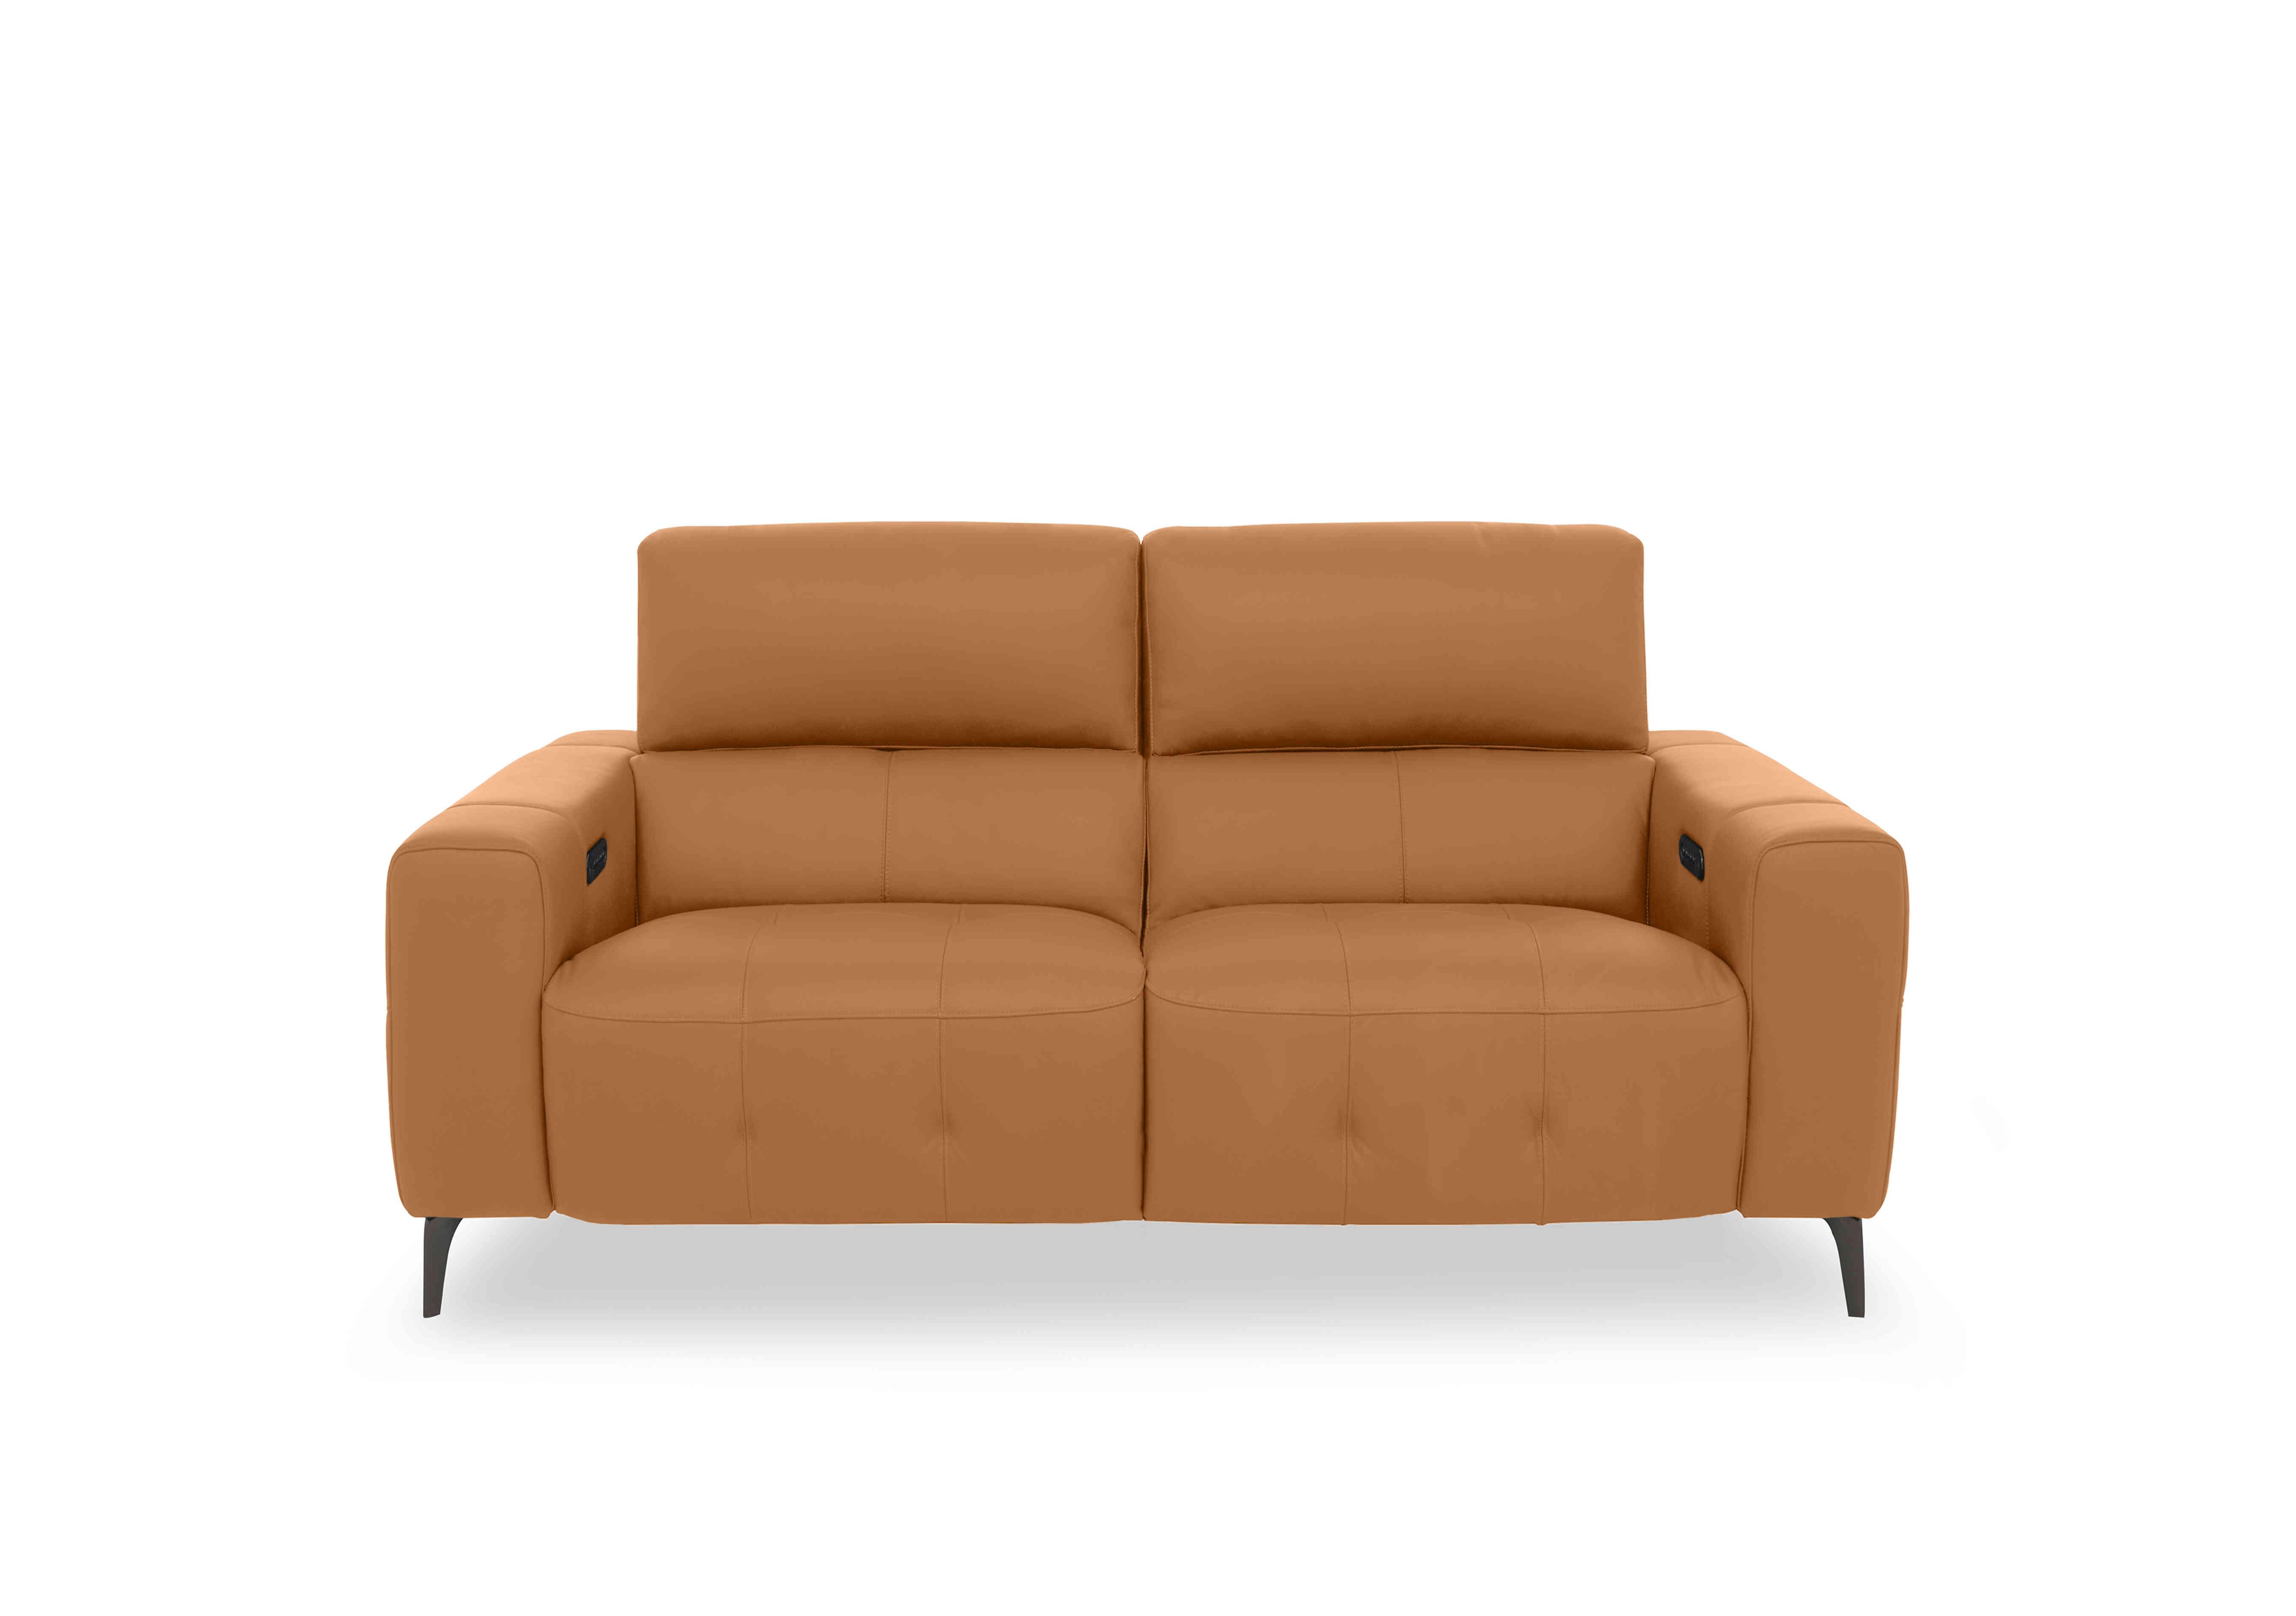 New York 2 Seater Leather Sofa in Bv-335e Honey Yellow on Furniture Village